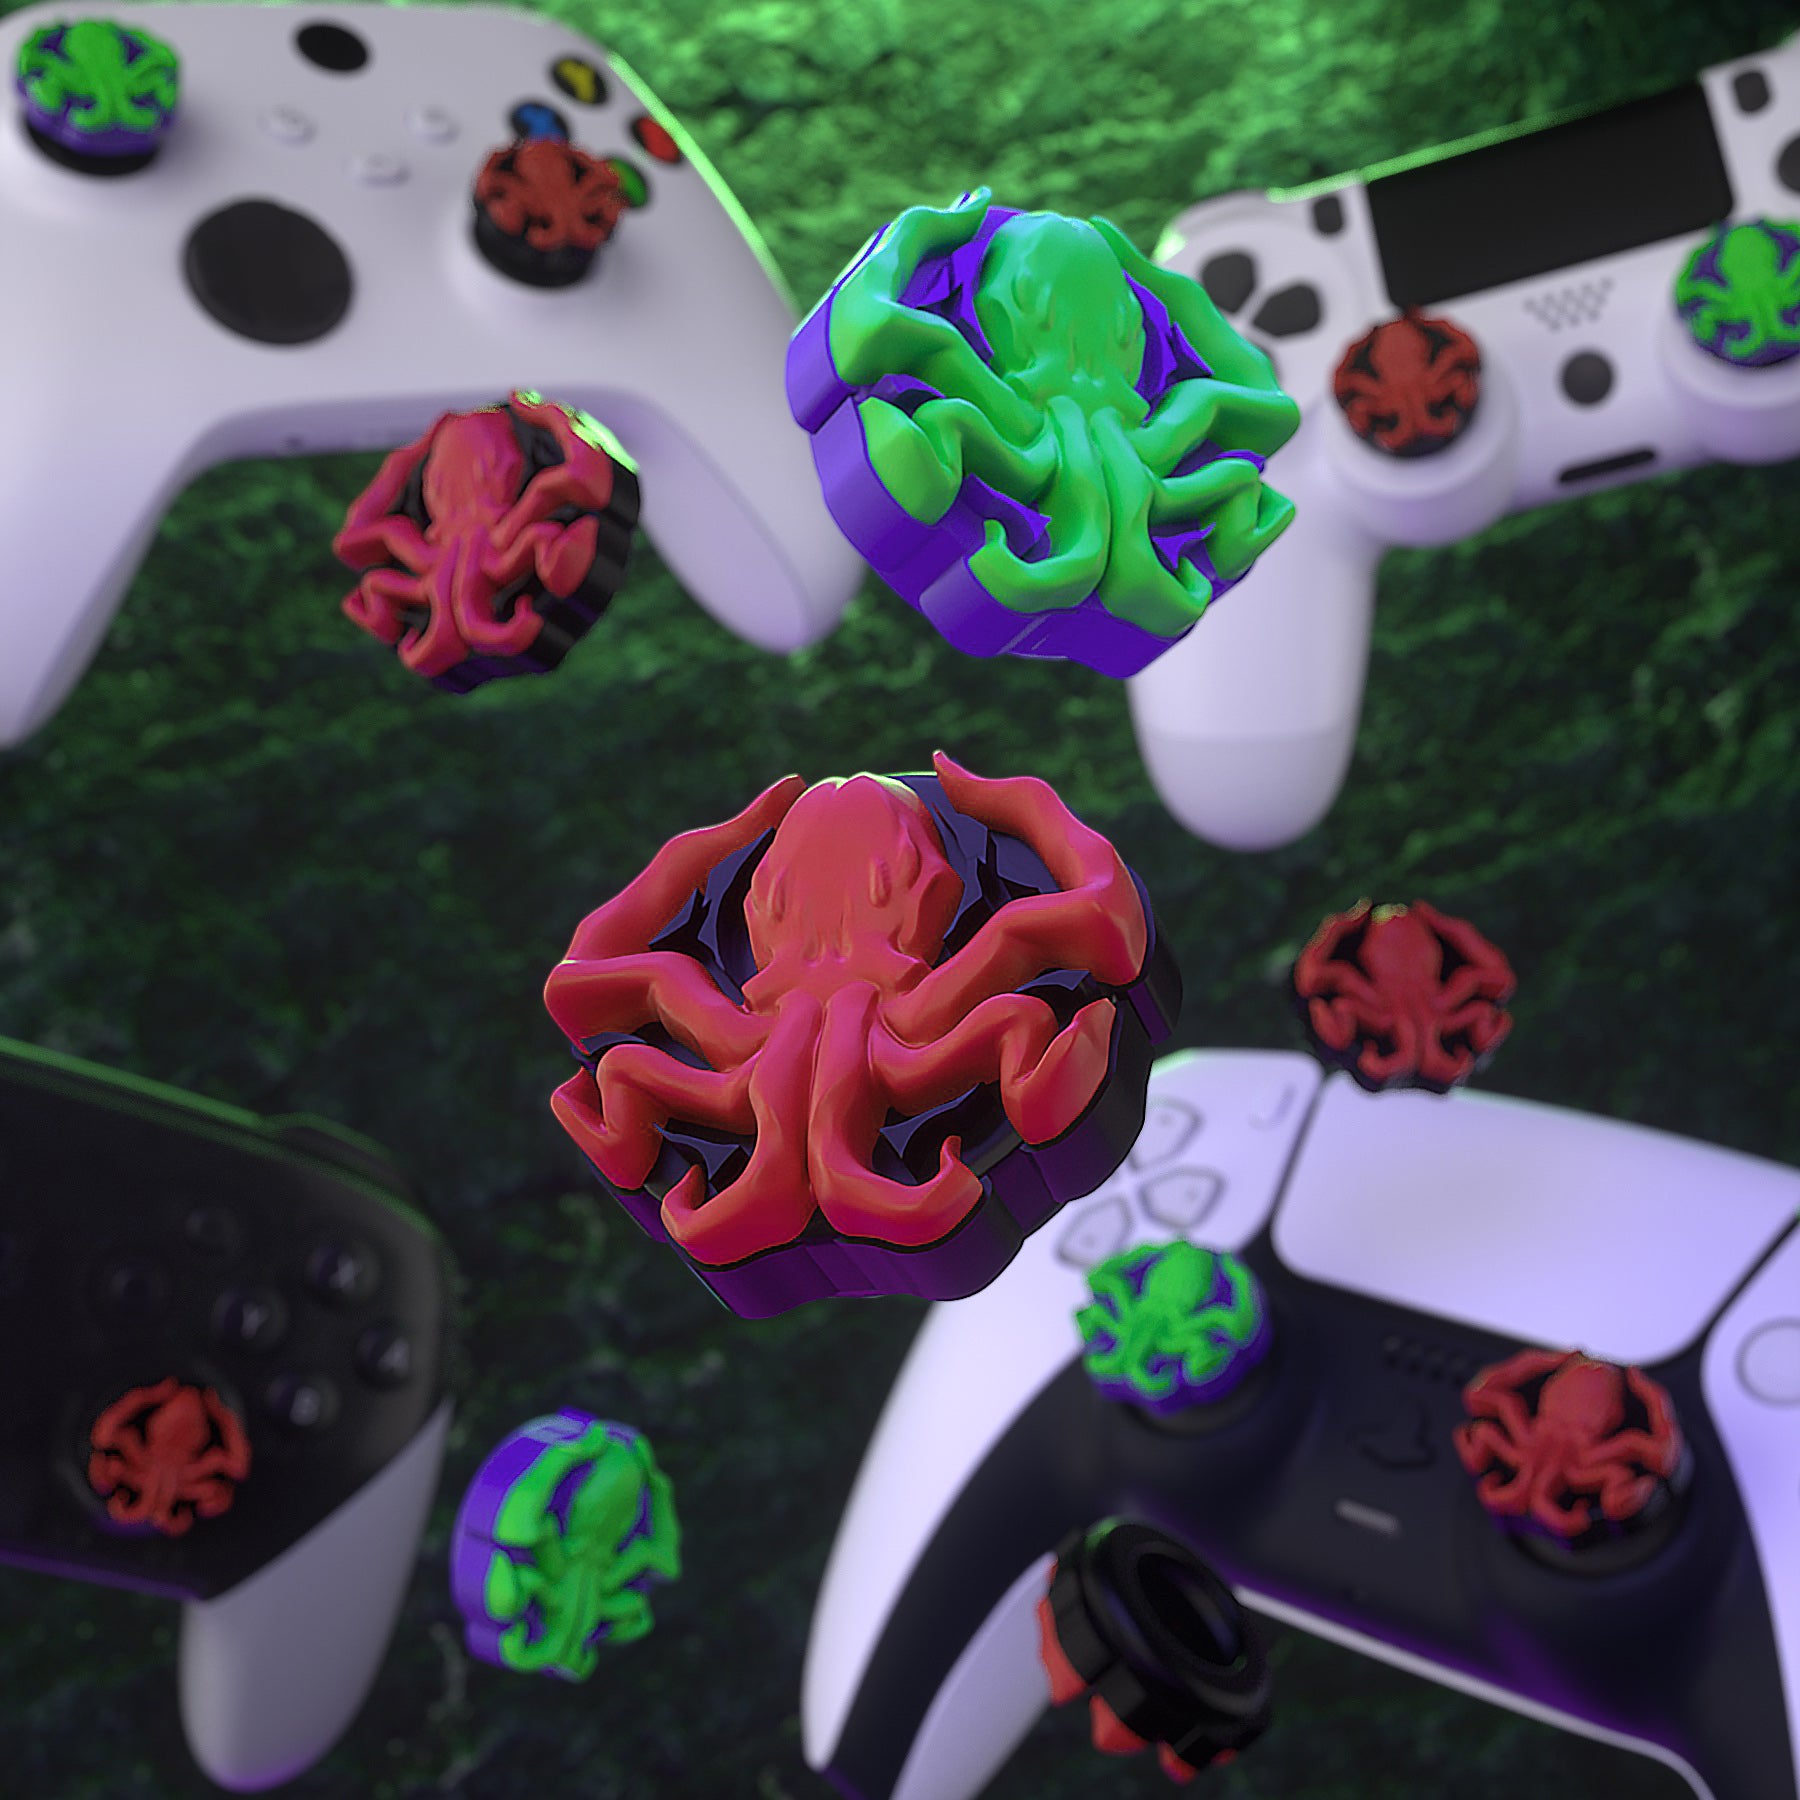 PlayVital Cute Thumb Grip Caps for ps5/4 Controller, Silicone Analog Stick Caps Cover for Xbox Series X/S, Thumbstick Caps for Switch Pro Controller - Cthulhu the Octopus - PJM3028 PlayVital